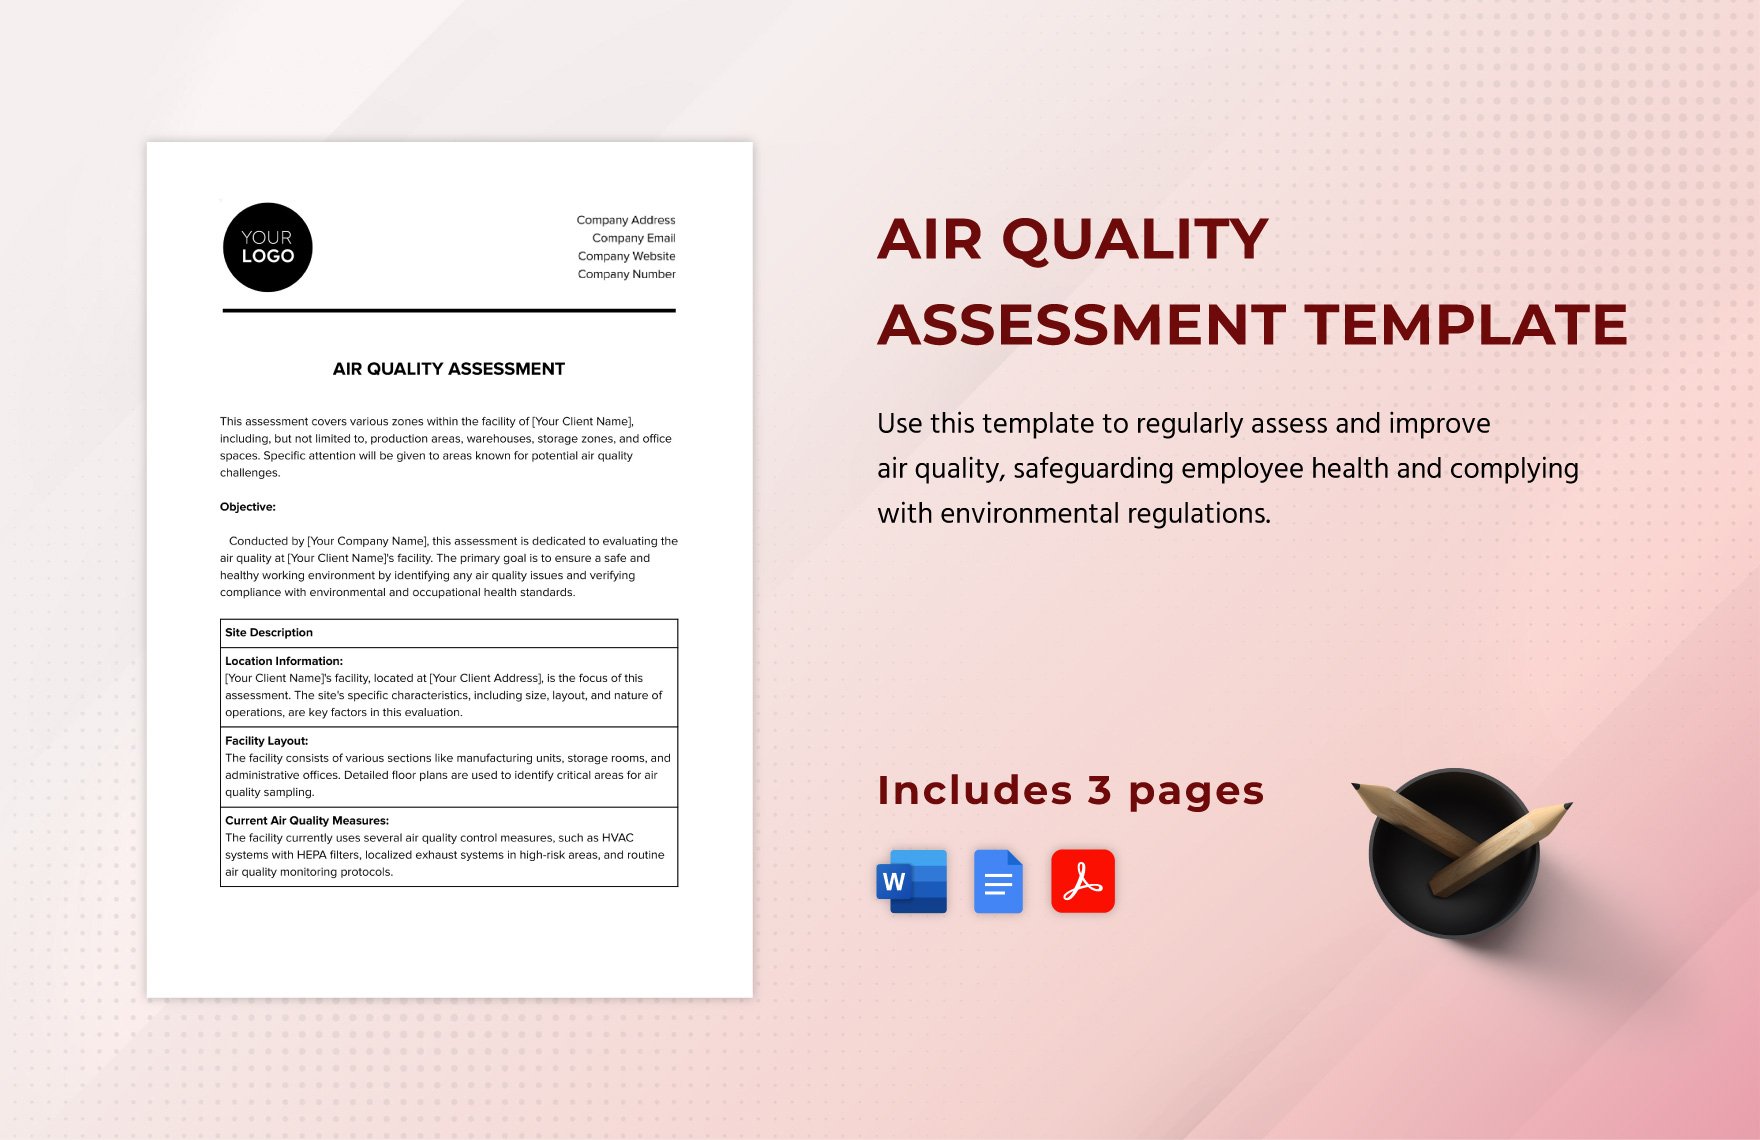 Air Quality Assessment Template in Word, Google Docs, PDF